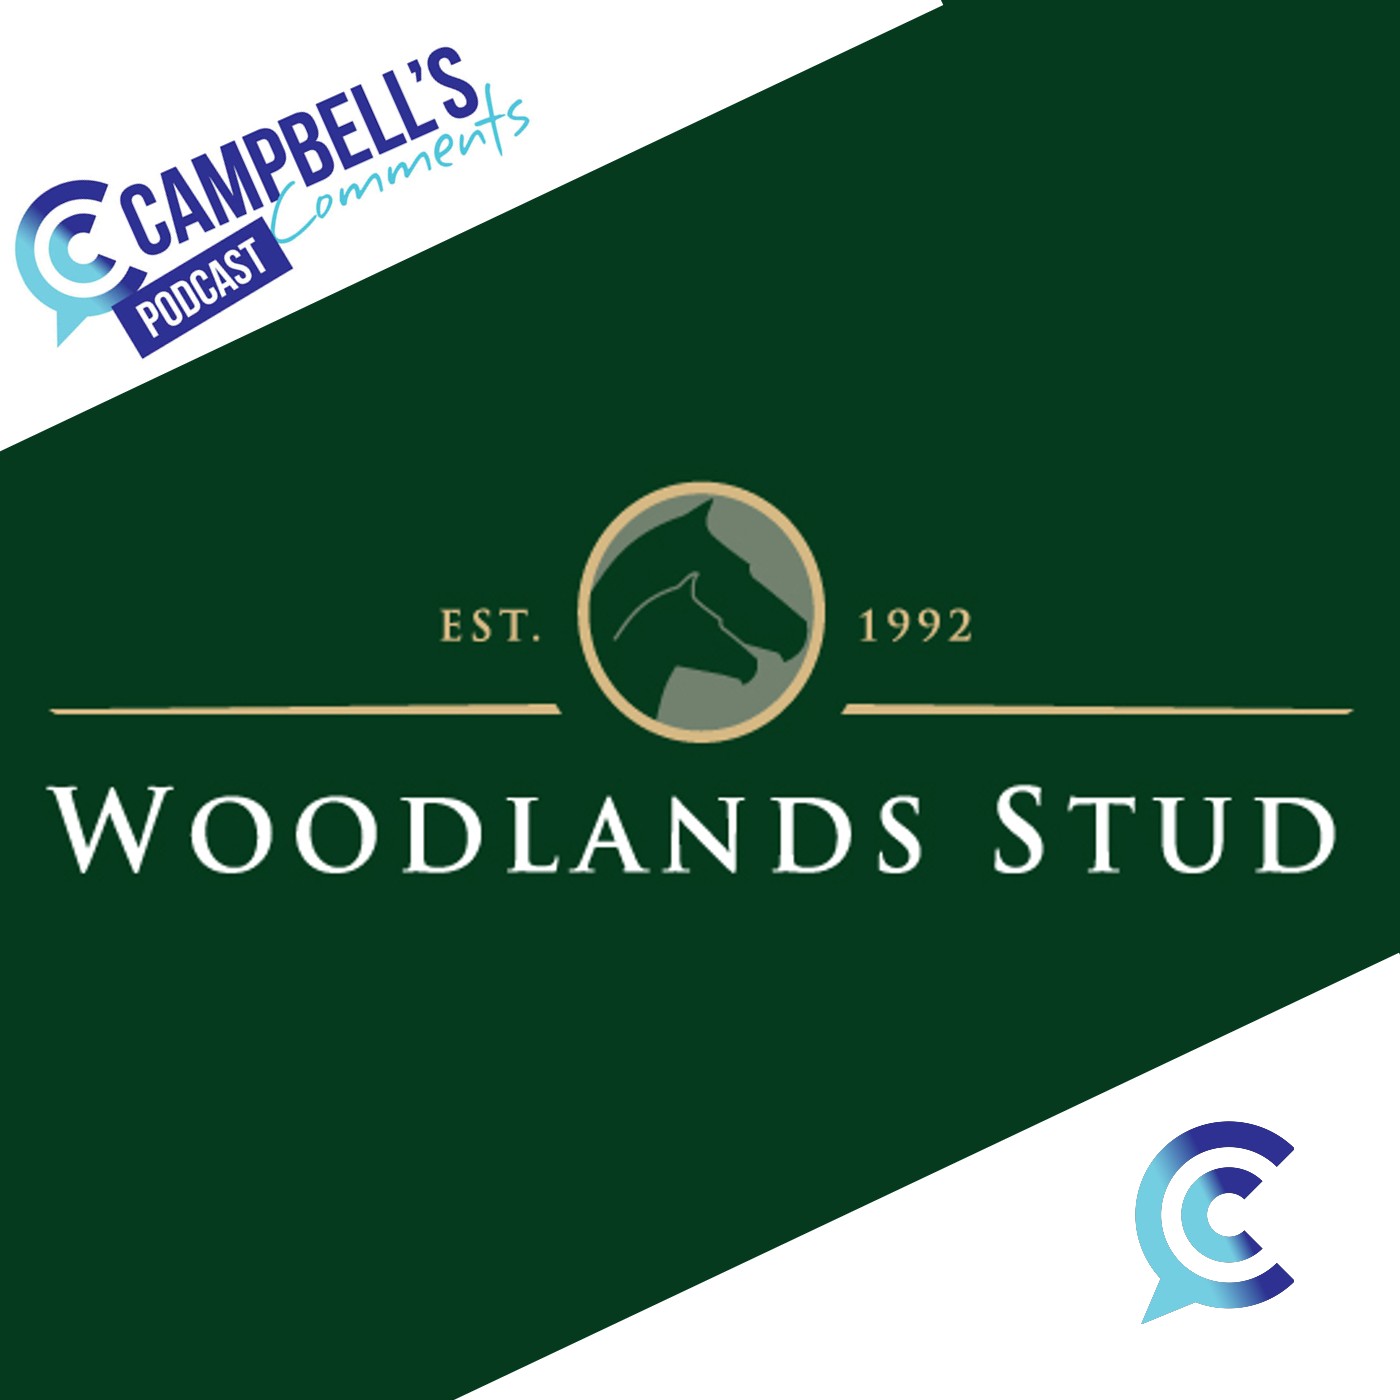 You are currently viewing 233: Campbells Comments with Mark Hughes for Woodlands Stud